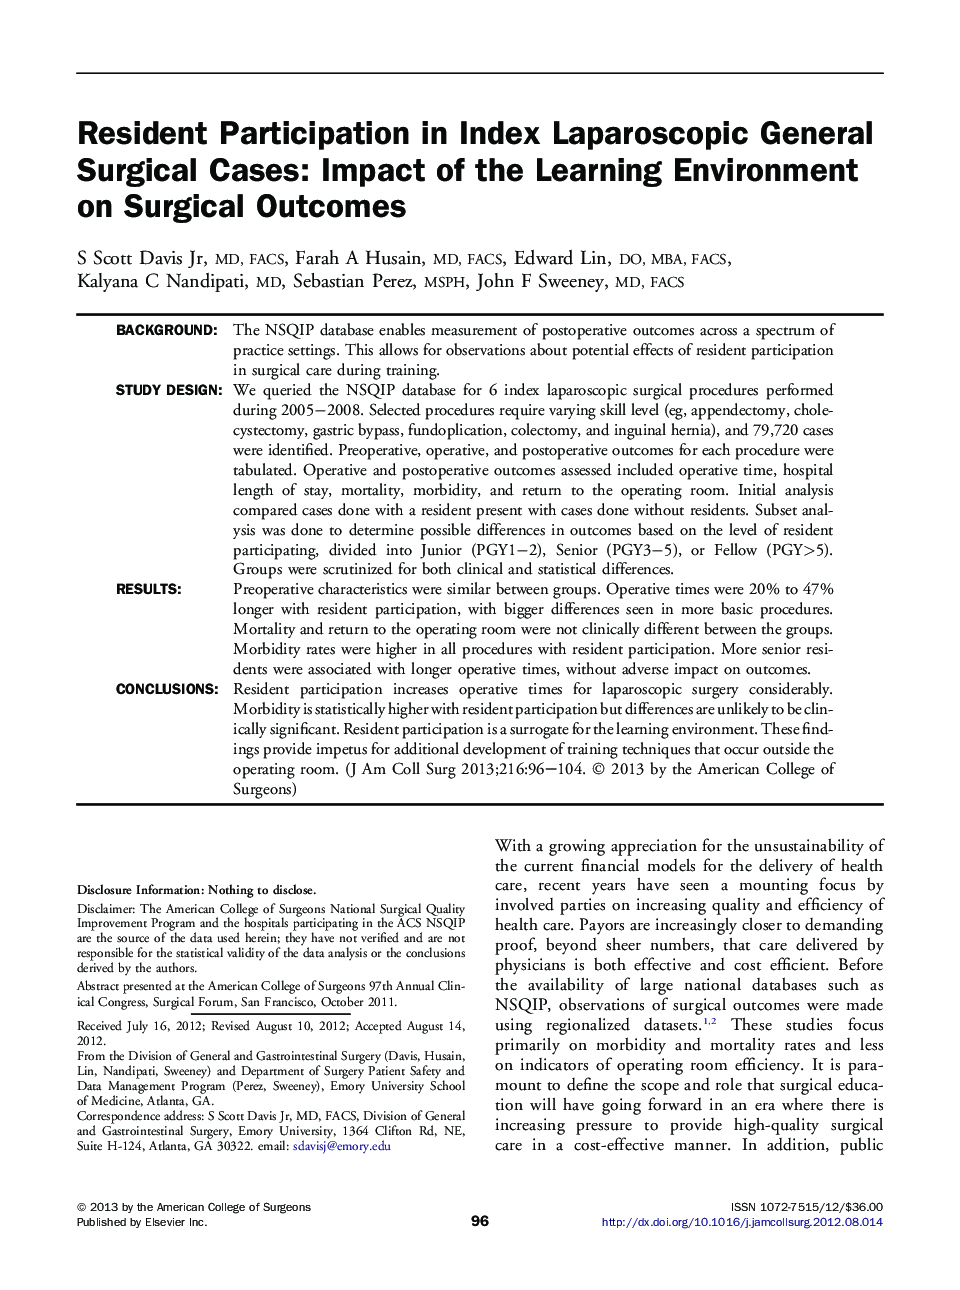 Resident Participation in Index Laparoscopic General Surgical Cases: Impact of the Learning Environment on Surgical Outcomes 